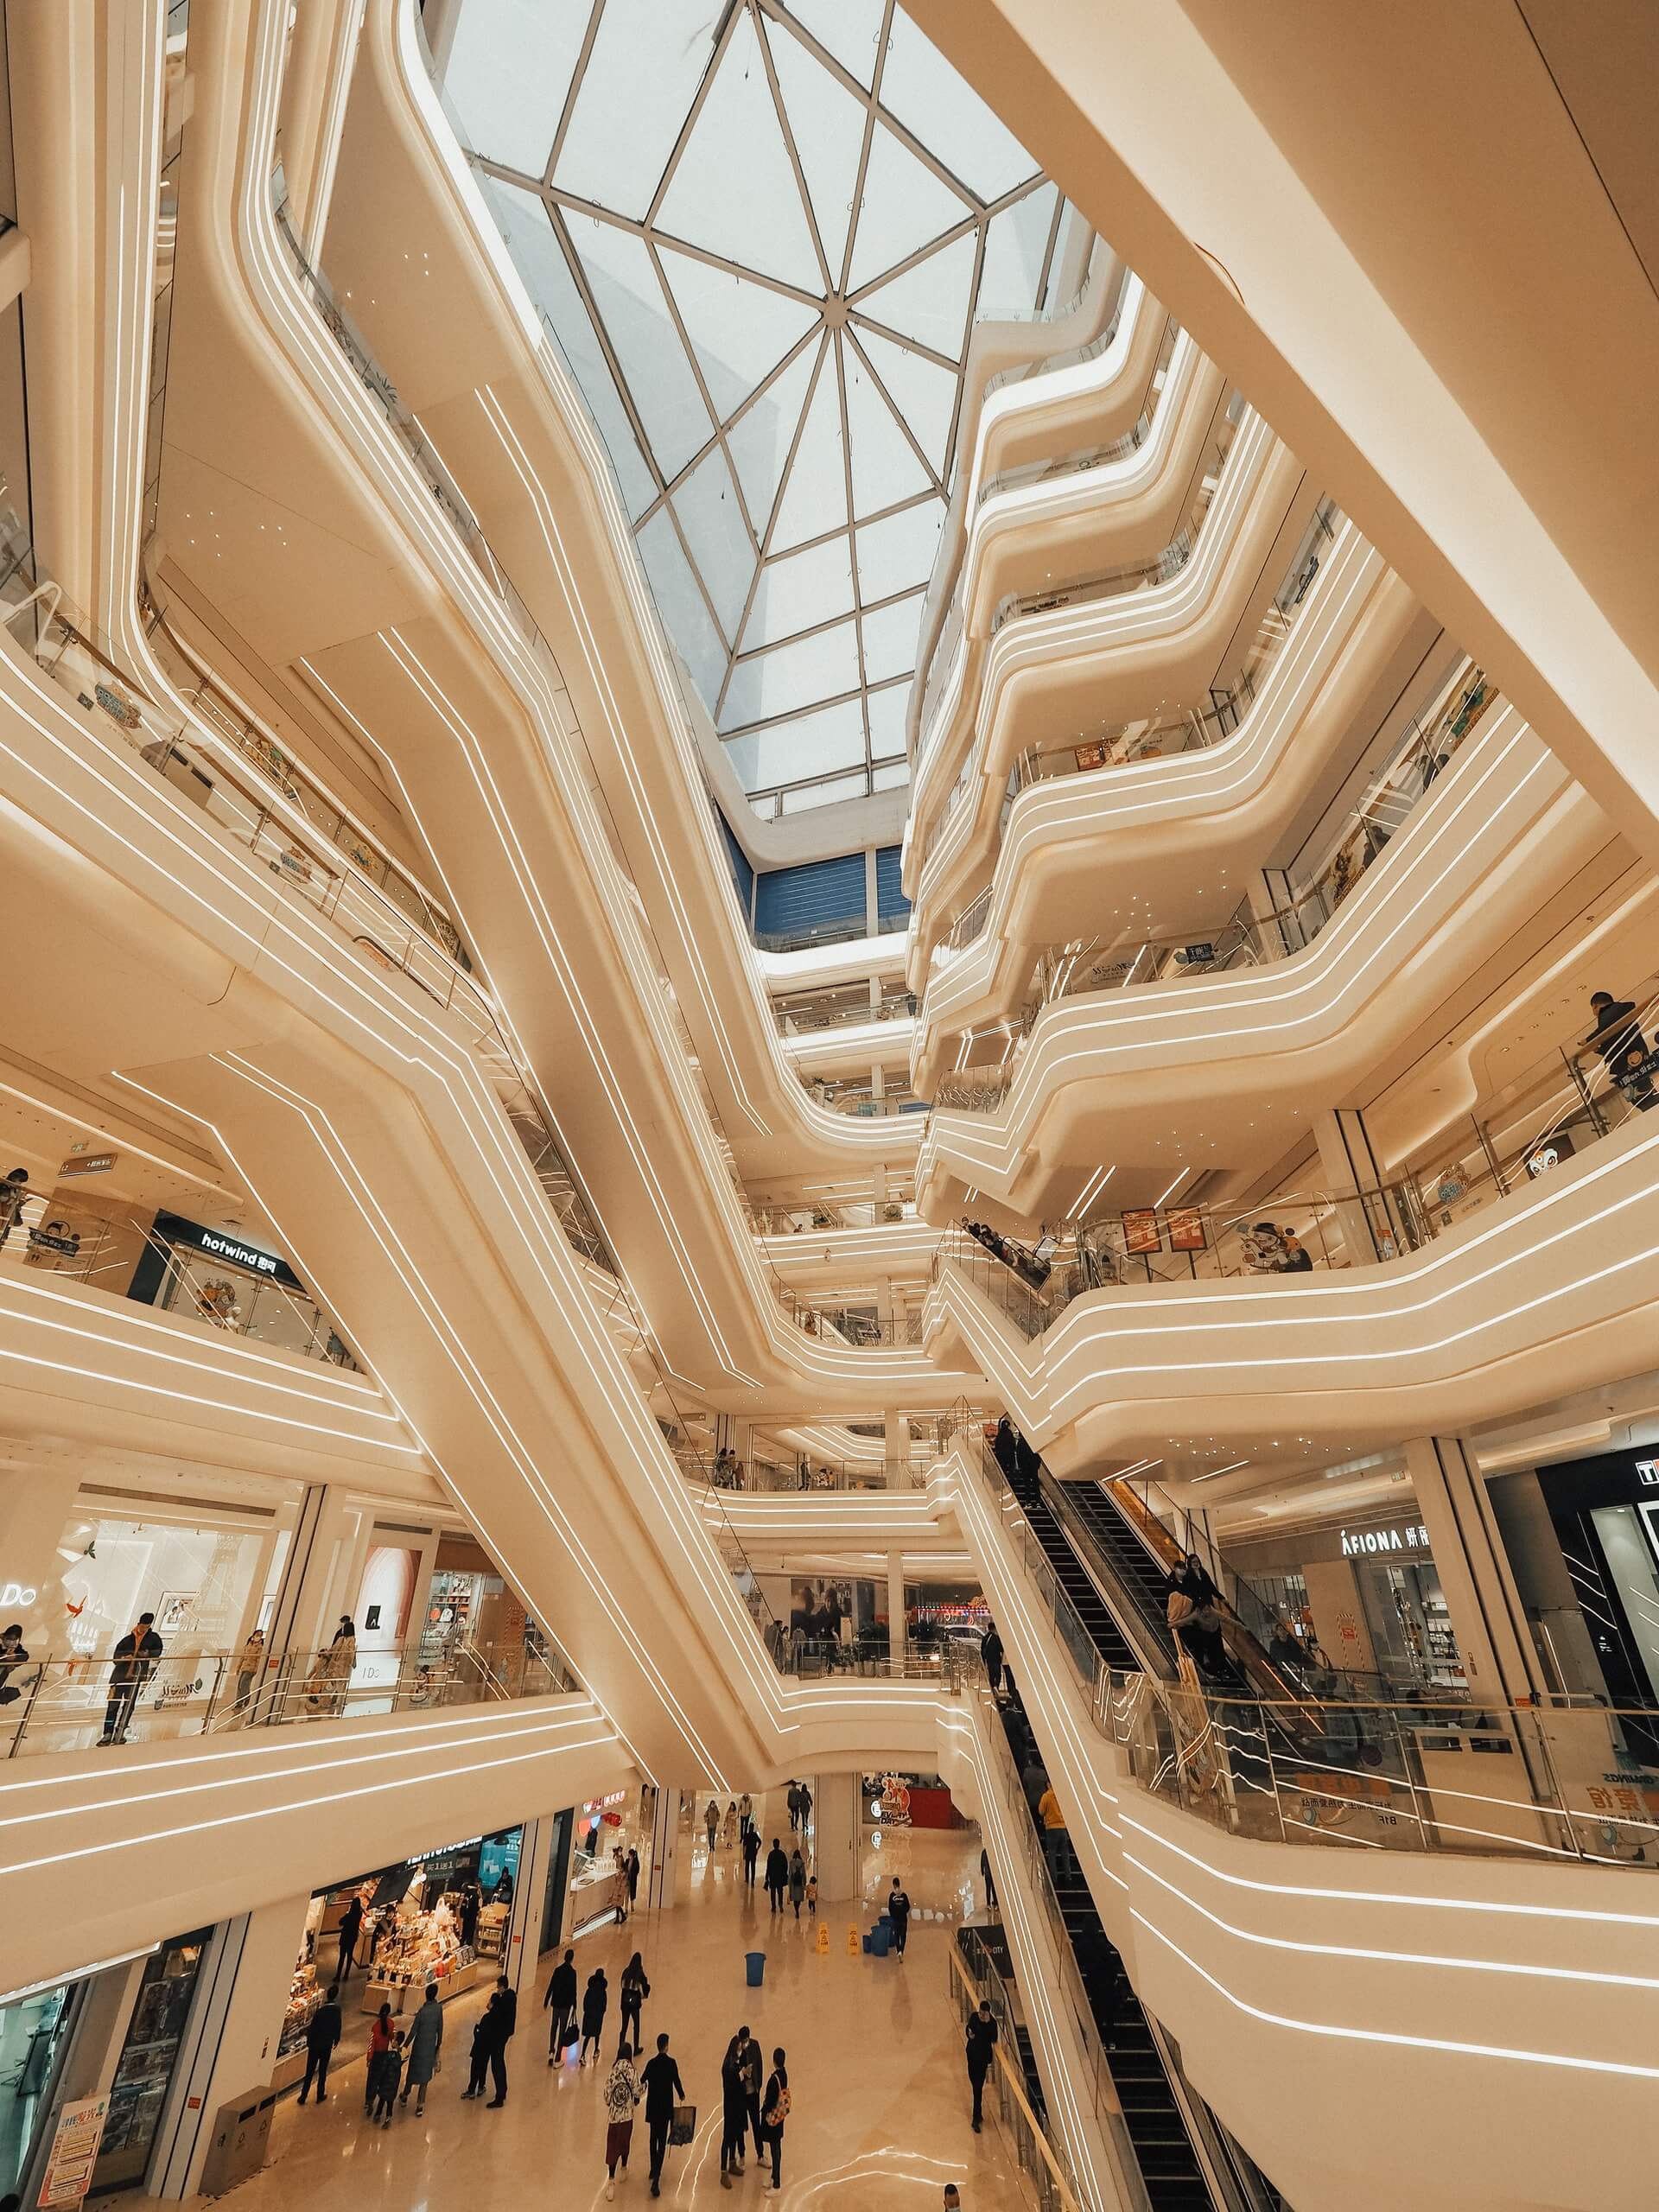 The world’s most interesting shopping malls